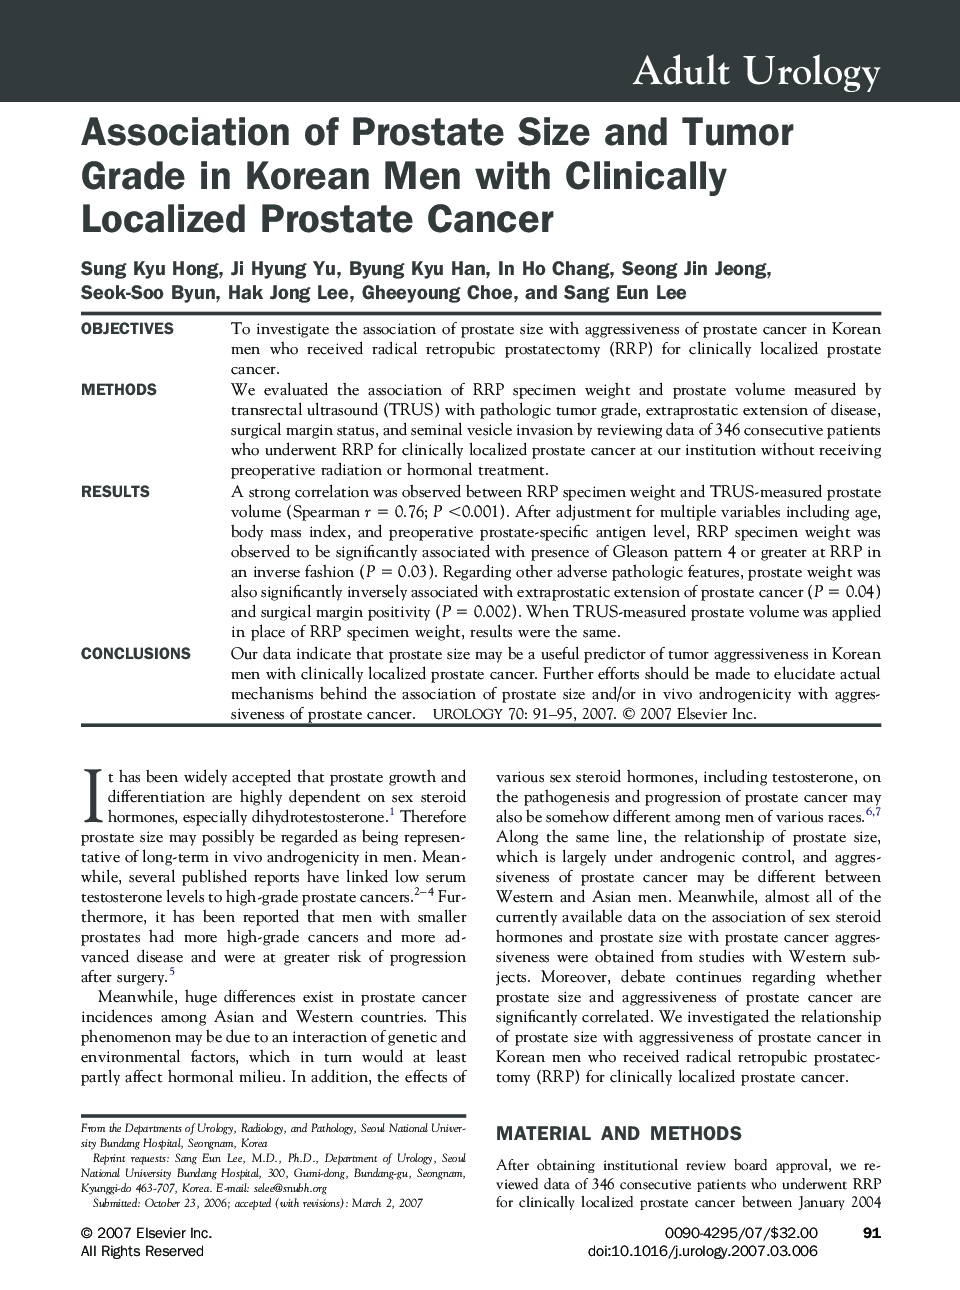 Association of Prostate Size and Tumor Grade in Korean Men with Clinically Localized Prostate Cancer